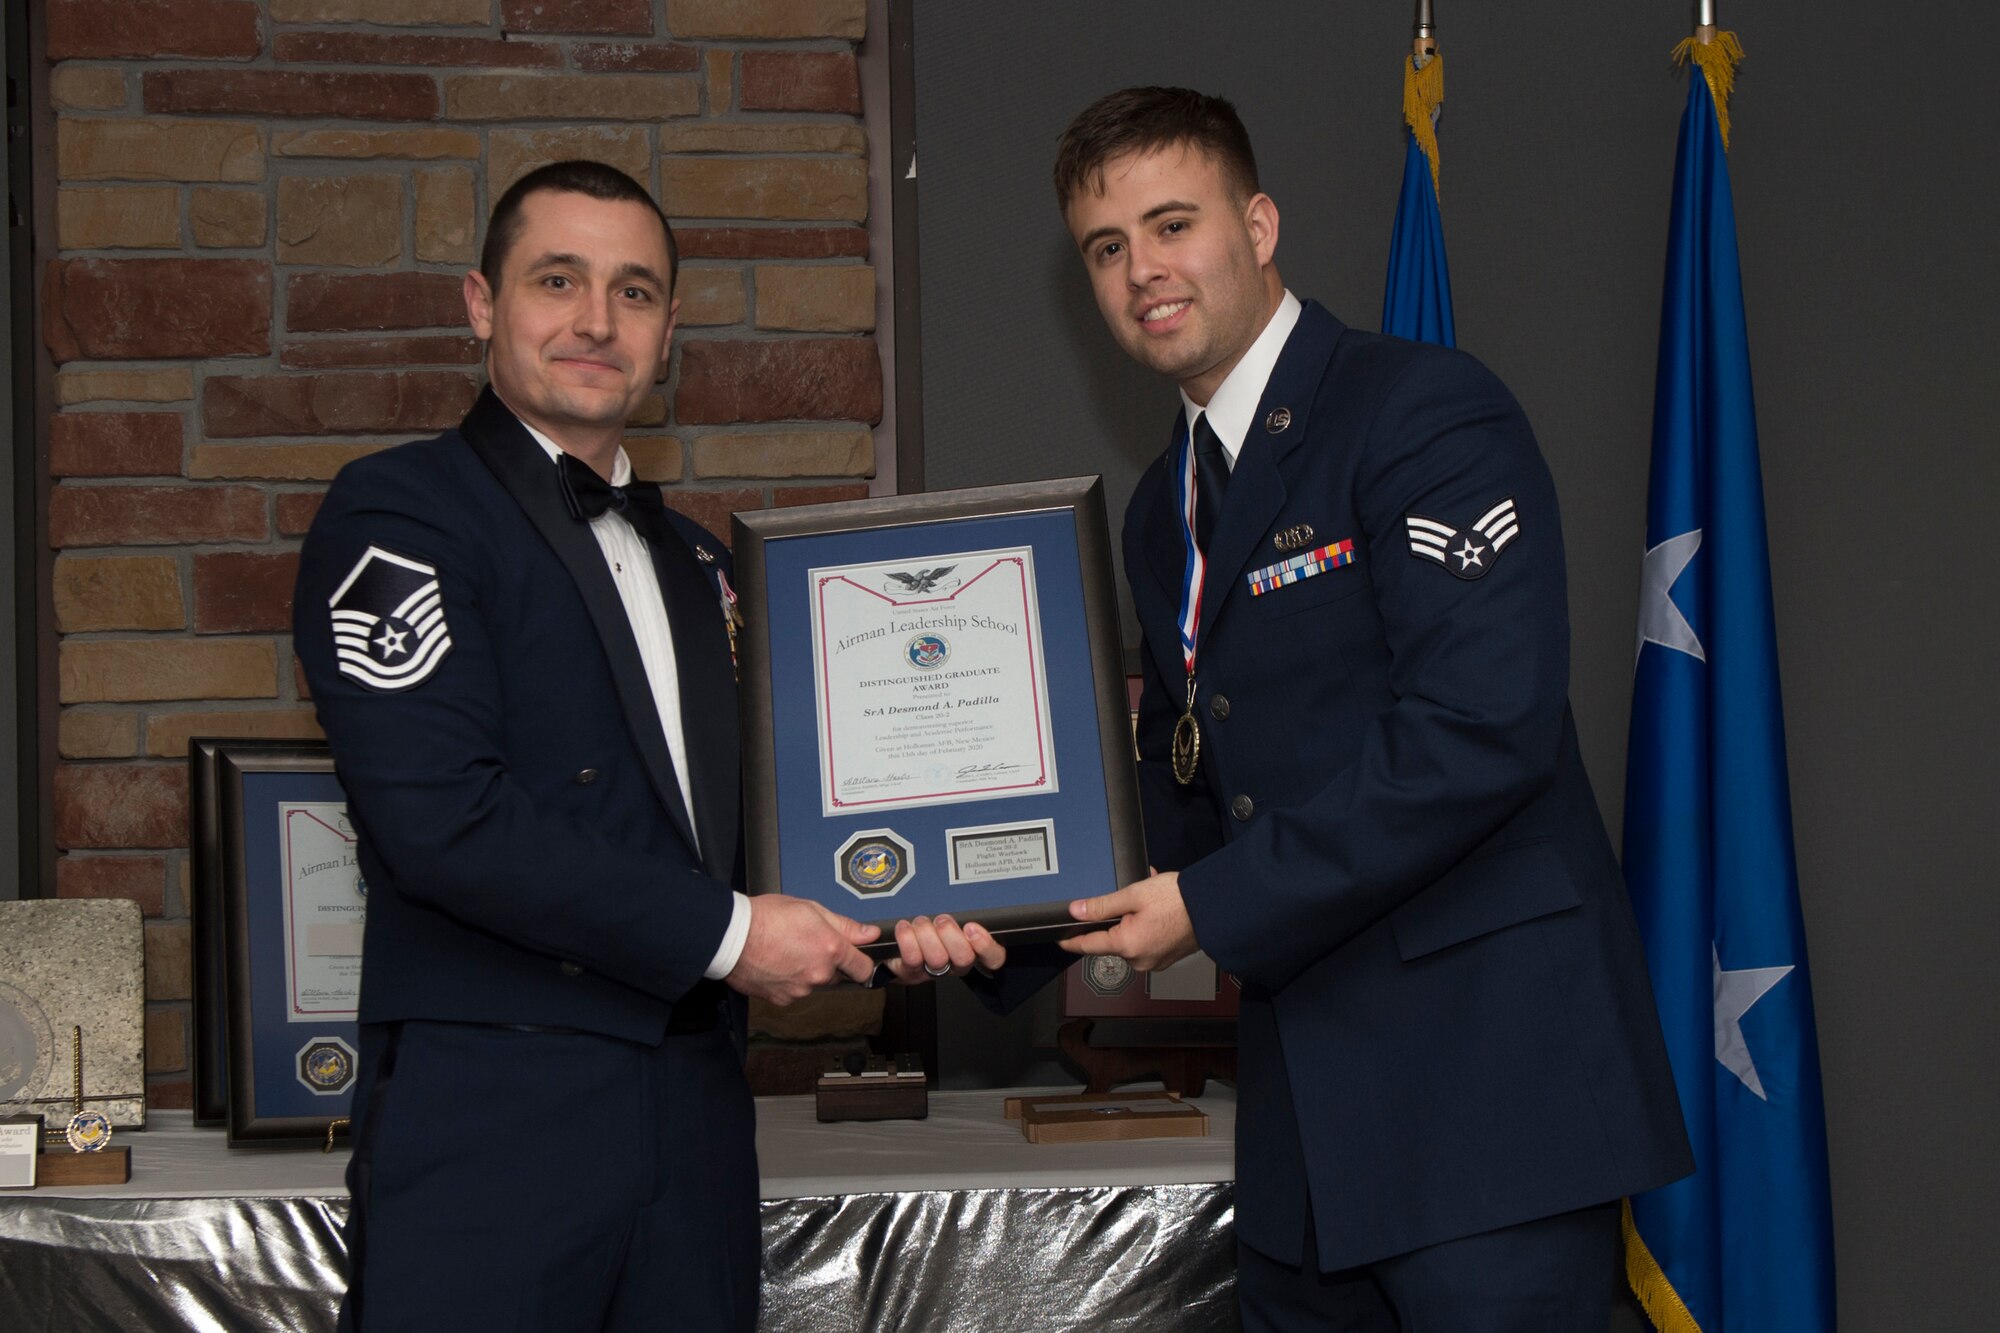 Senior Airman Desmond Padilla, Airman Leadership School graduate, accepts the distinguished graduate award during the graduation of ALS class 20-2, Feb.13, 2020, on Holloman Air Force Base, N.M. The distinguished graduate award is presented to the top ten-percent of graduates for their performance in academic evaluations and demonstration of leadership. (U.S. Air Force photo by Airman 1st Class Kristin Weathersby).